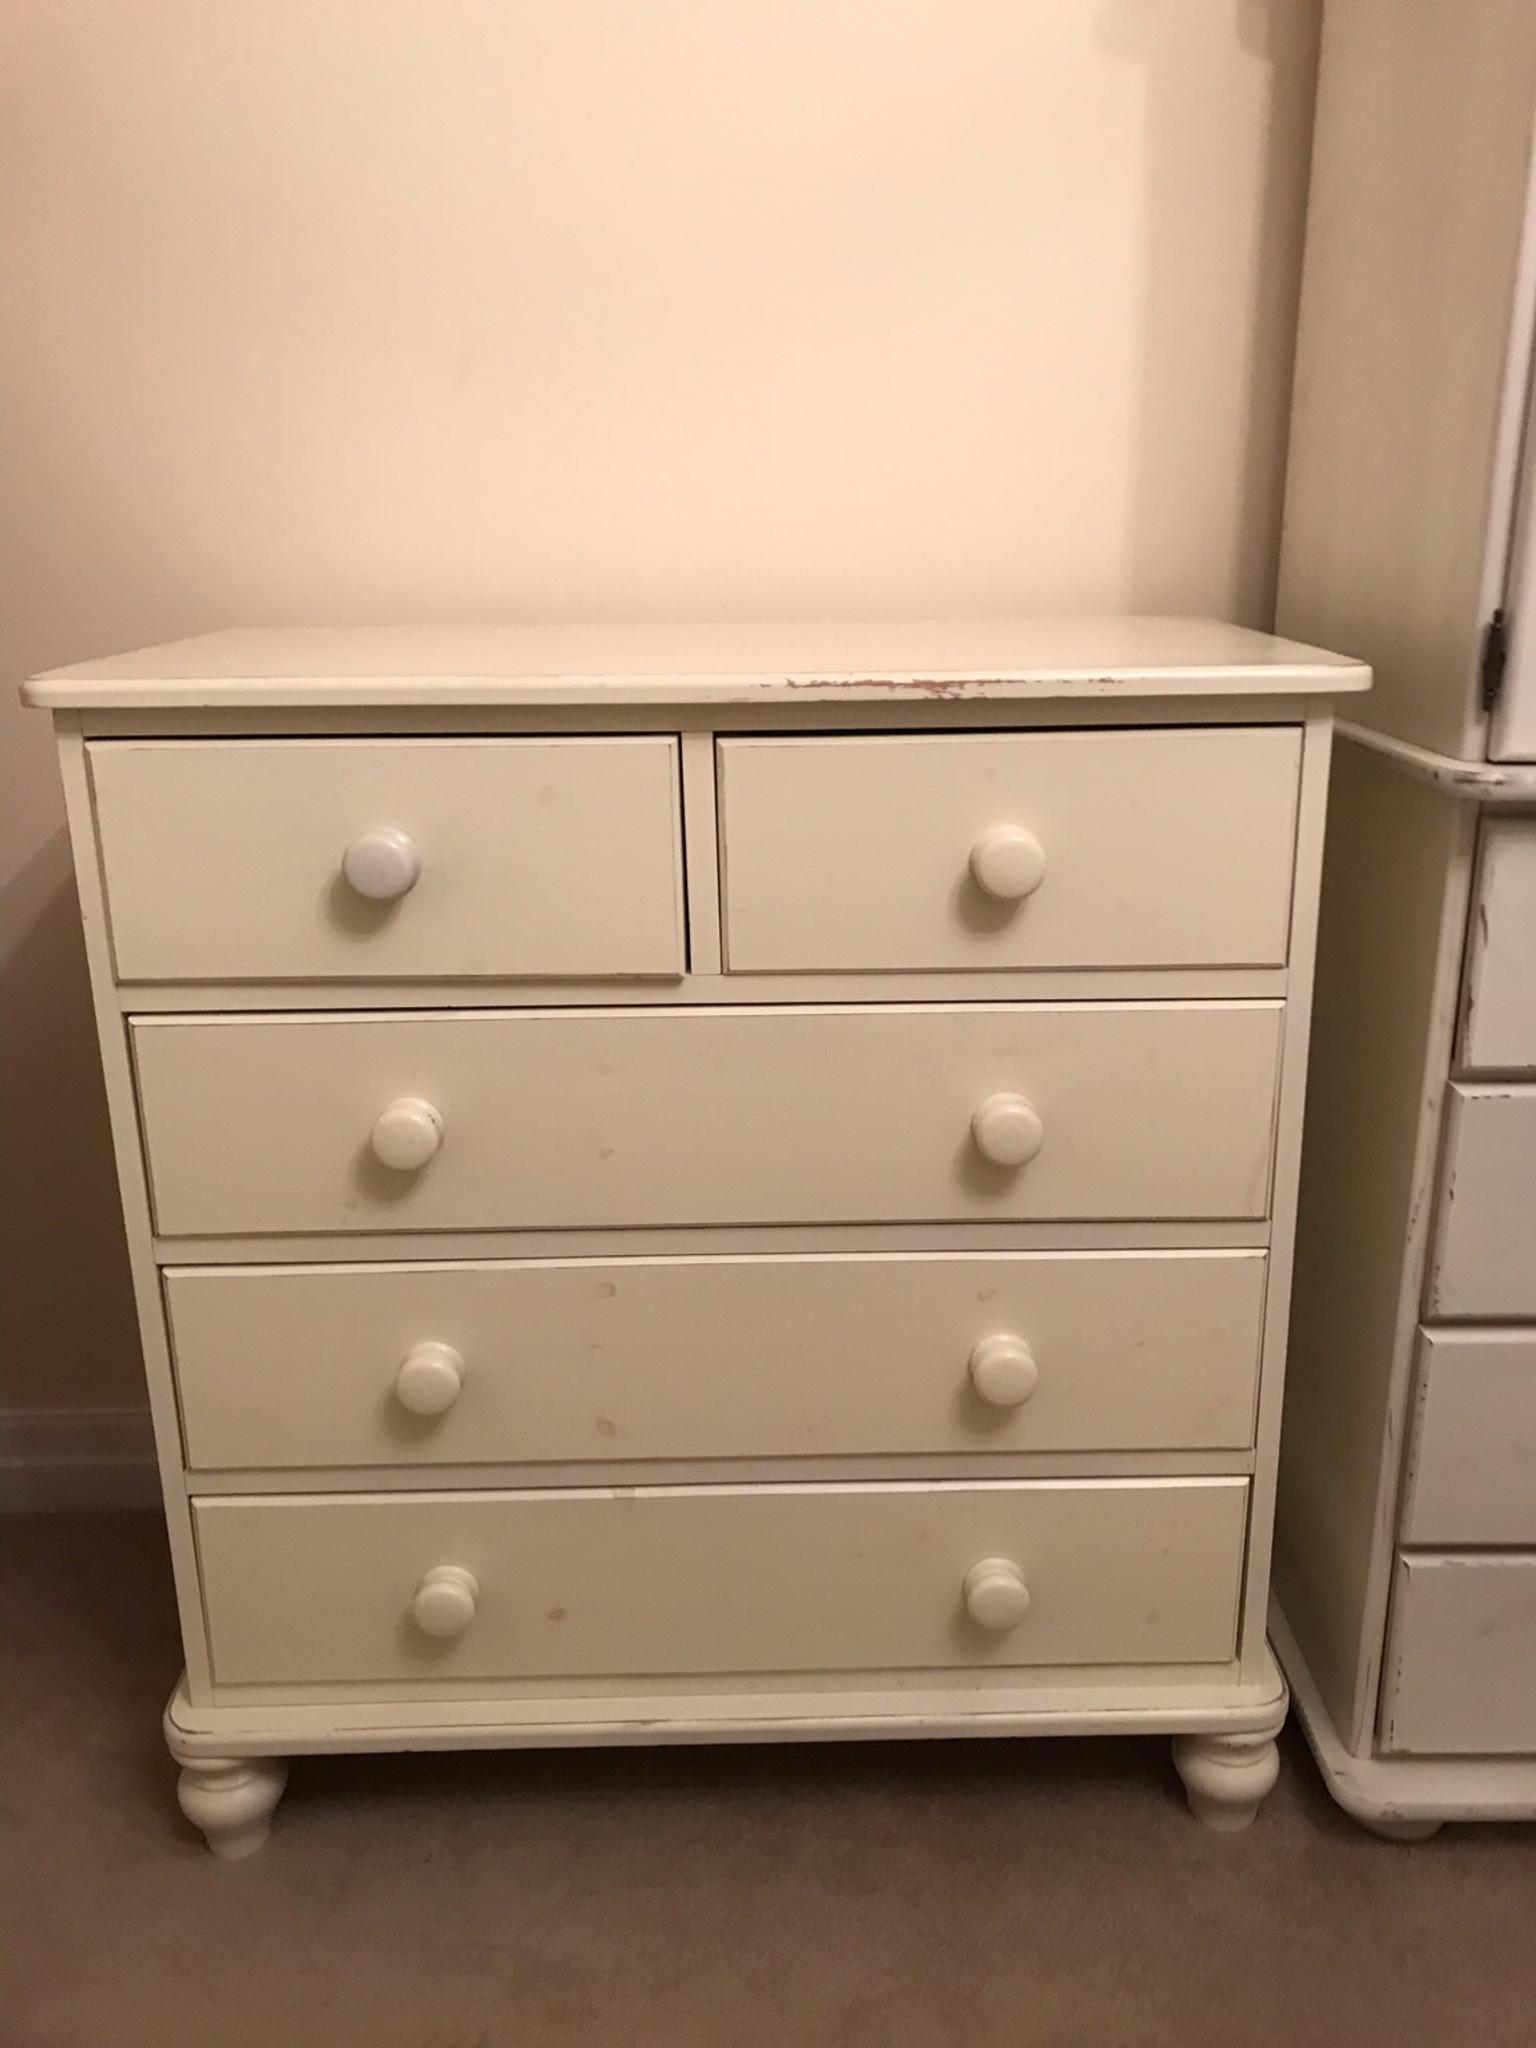 Chest Of Drawers And Wardrobe In Hd8 Kirklees For 80 00 For Sale